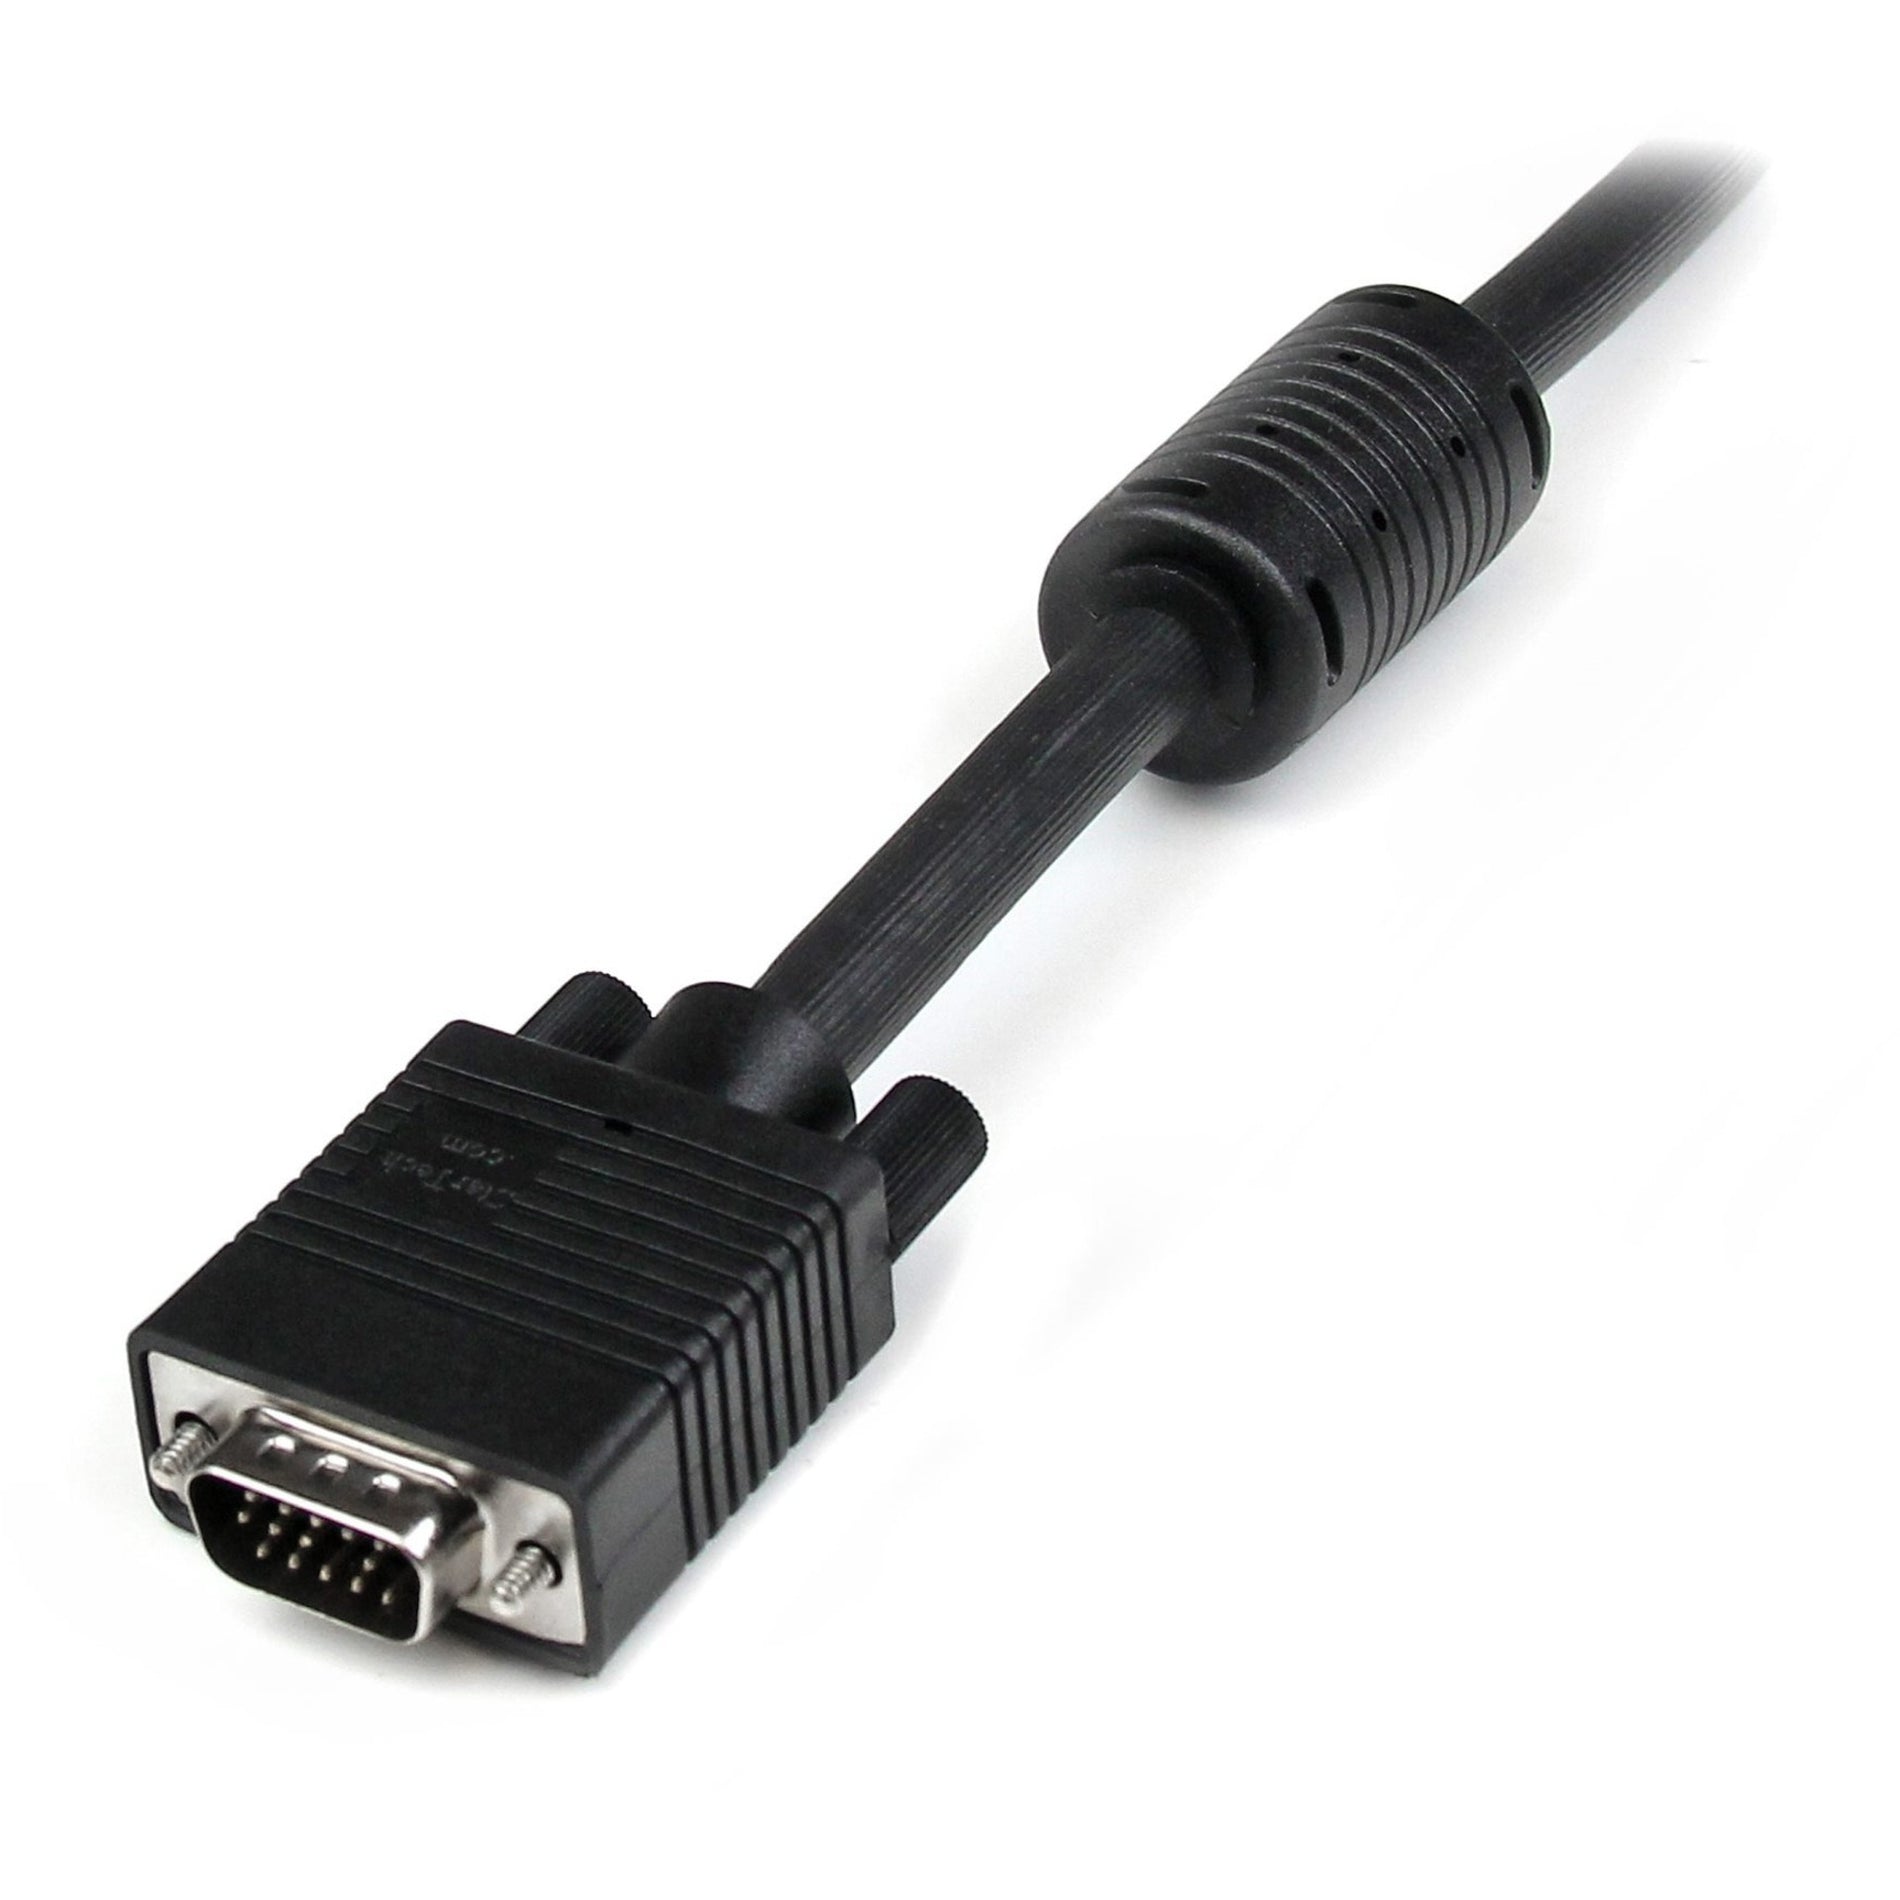 StarTech.com MXT101MMHQ30 30 ft Coax High Resolution VGA Monitor Cable - HD15 M/M, Strain Relief, EMI Protection, Molded, Ferrite Bead, 1920 x 1200 Supported Resolution